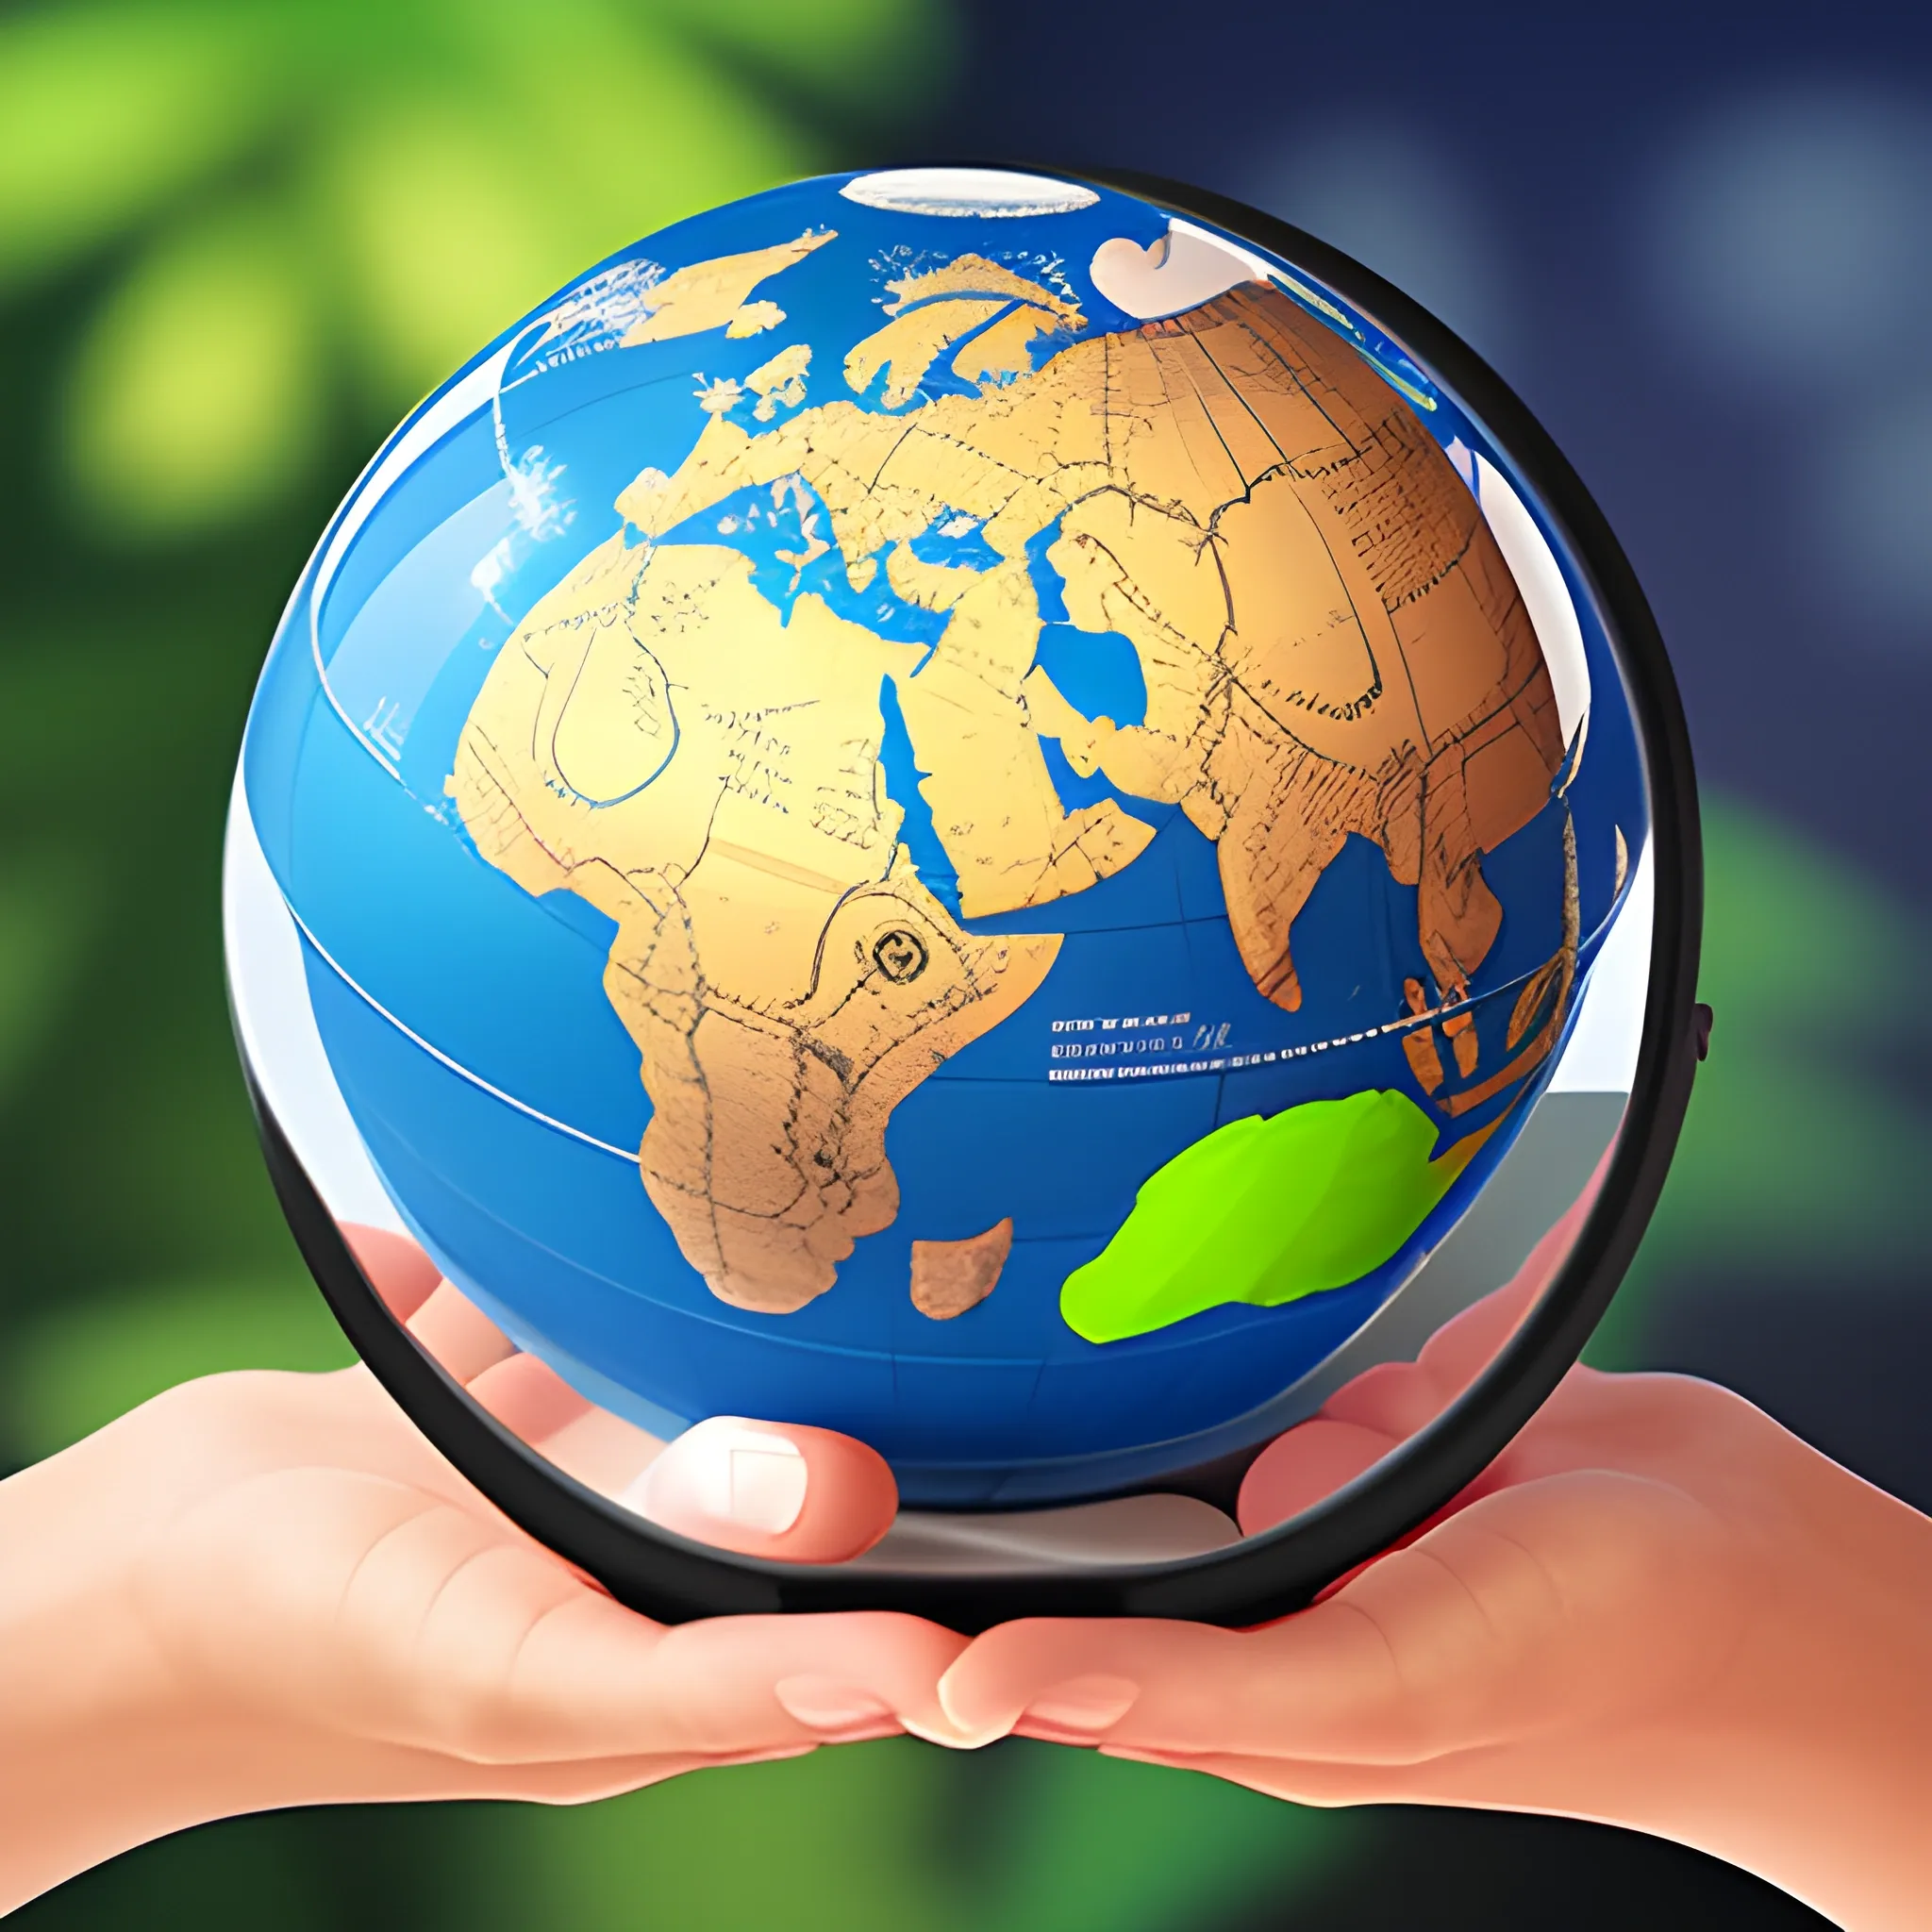 Globe terraqueo held in the palm of a hand symbolizing the global of online education